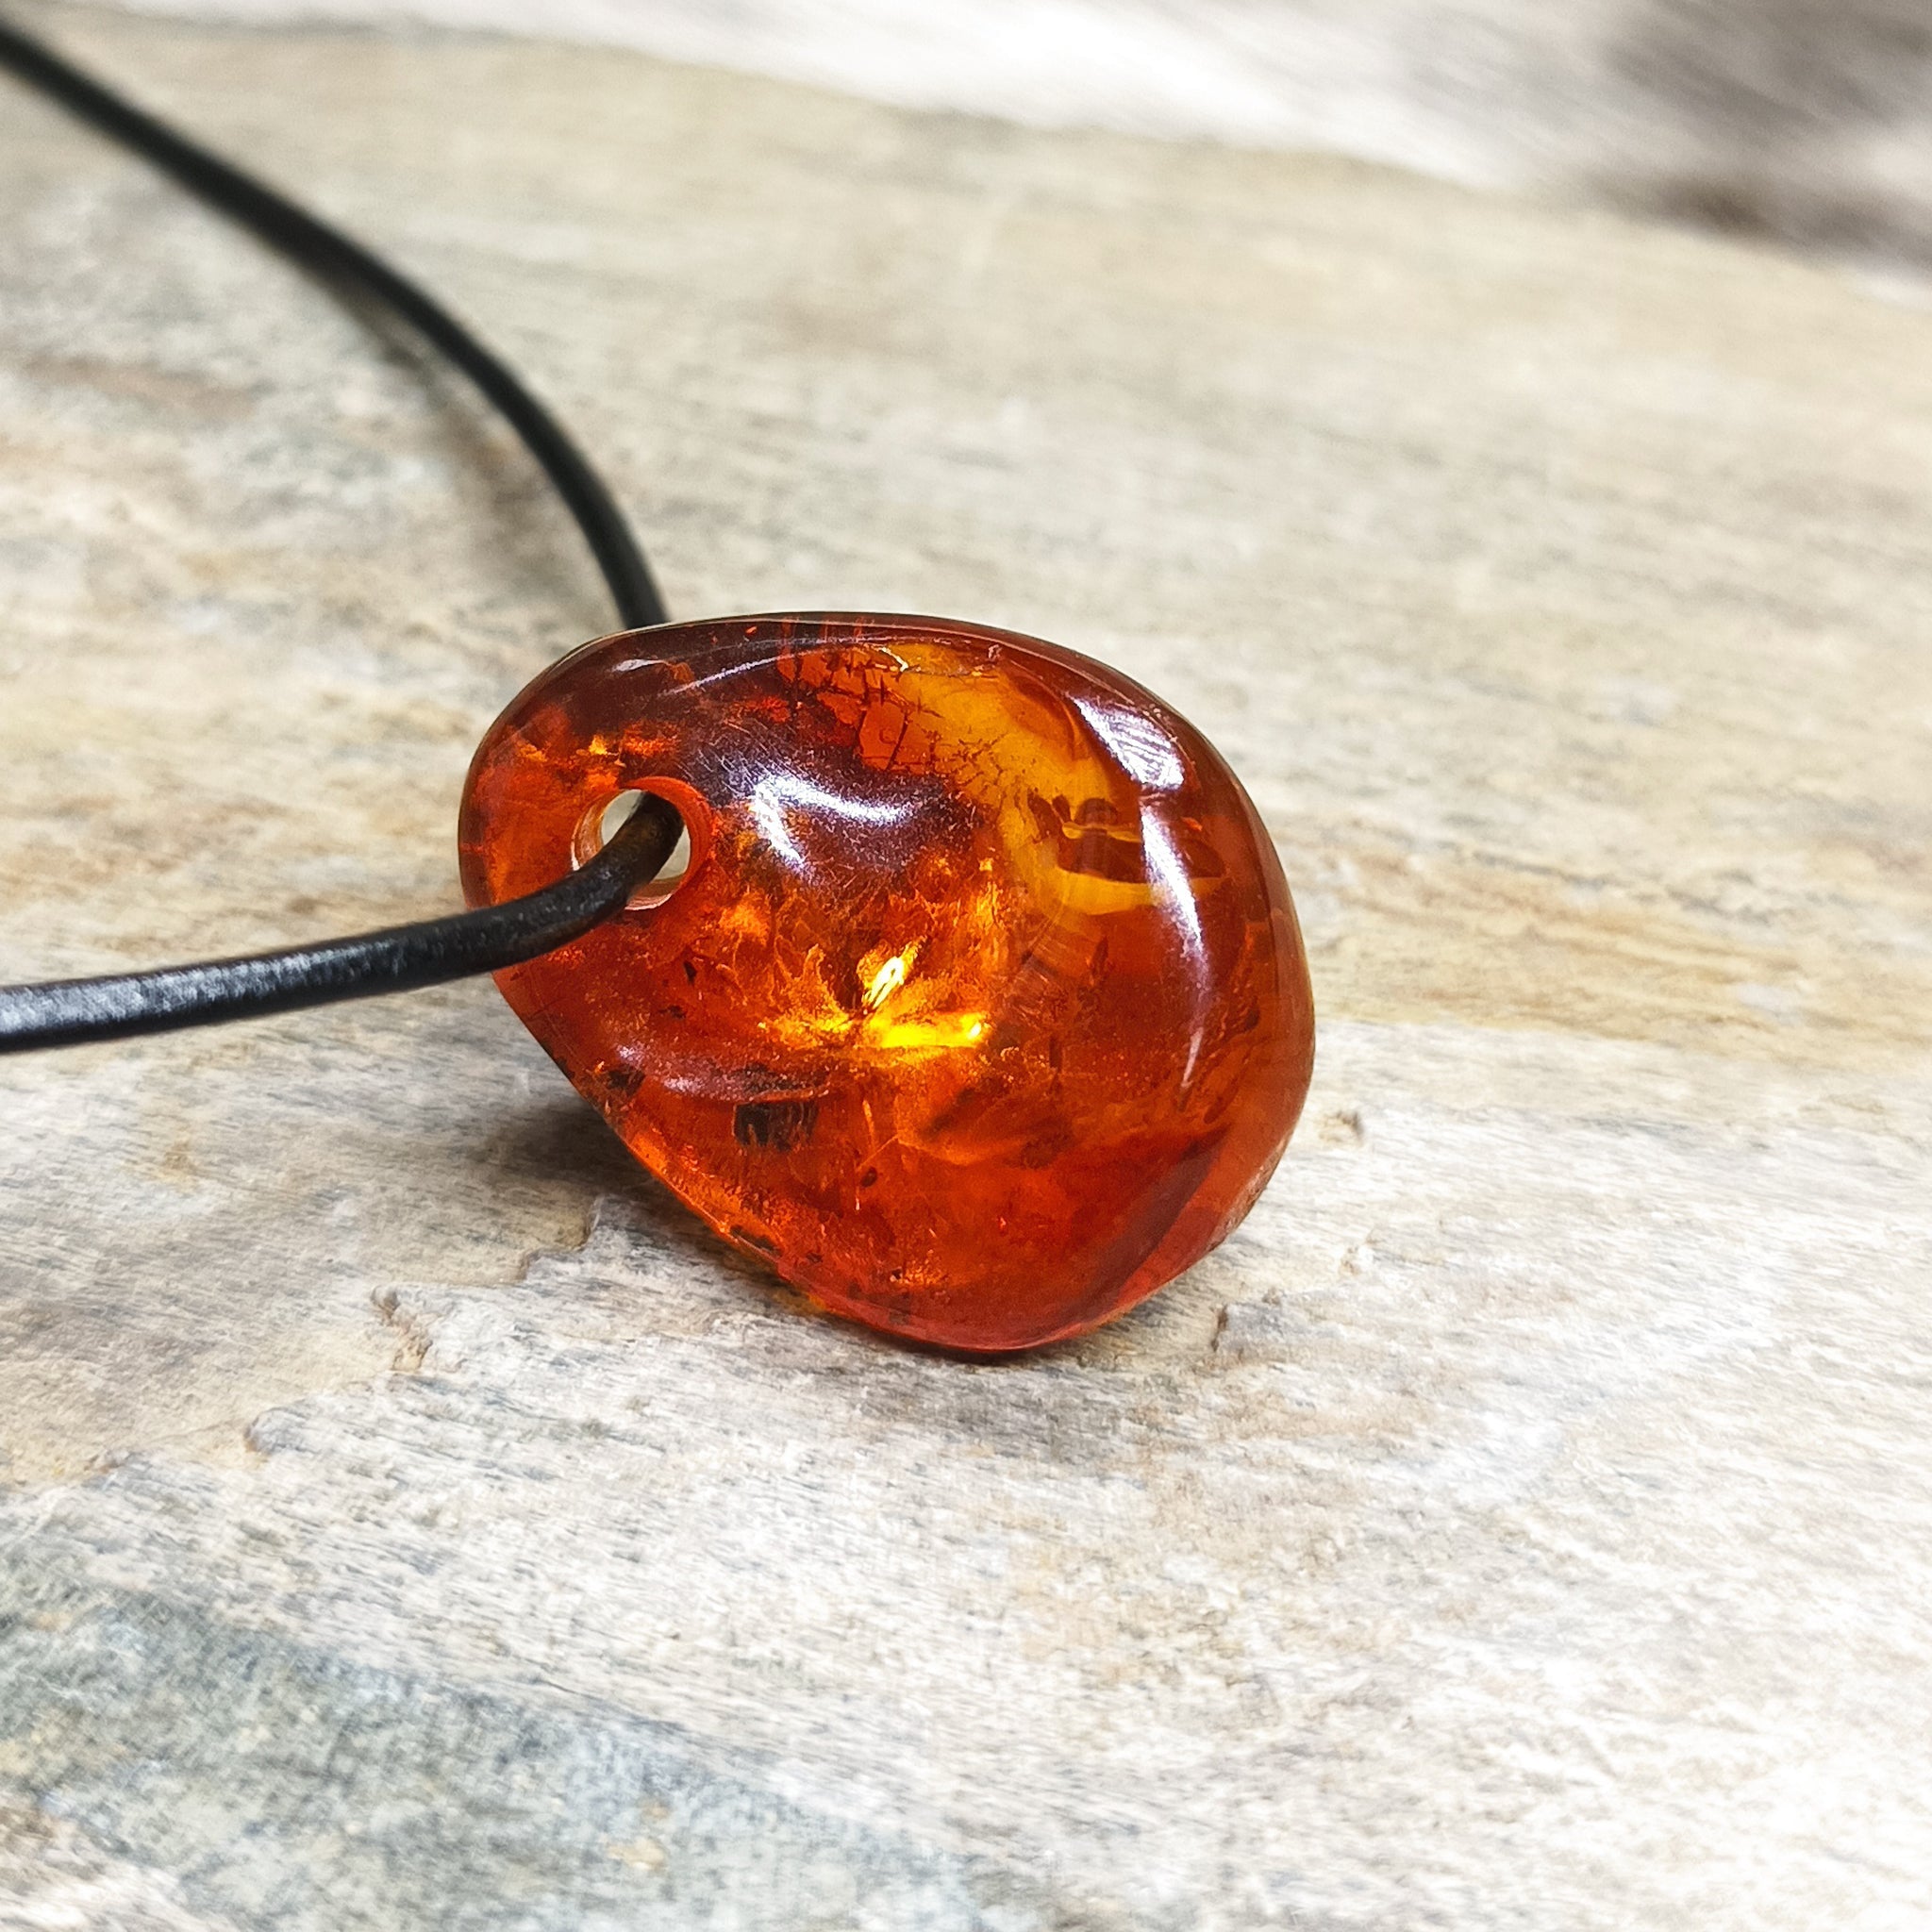 Amber Amulet Pendant on Rock with Leather Thong on Side